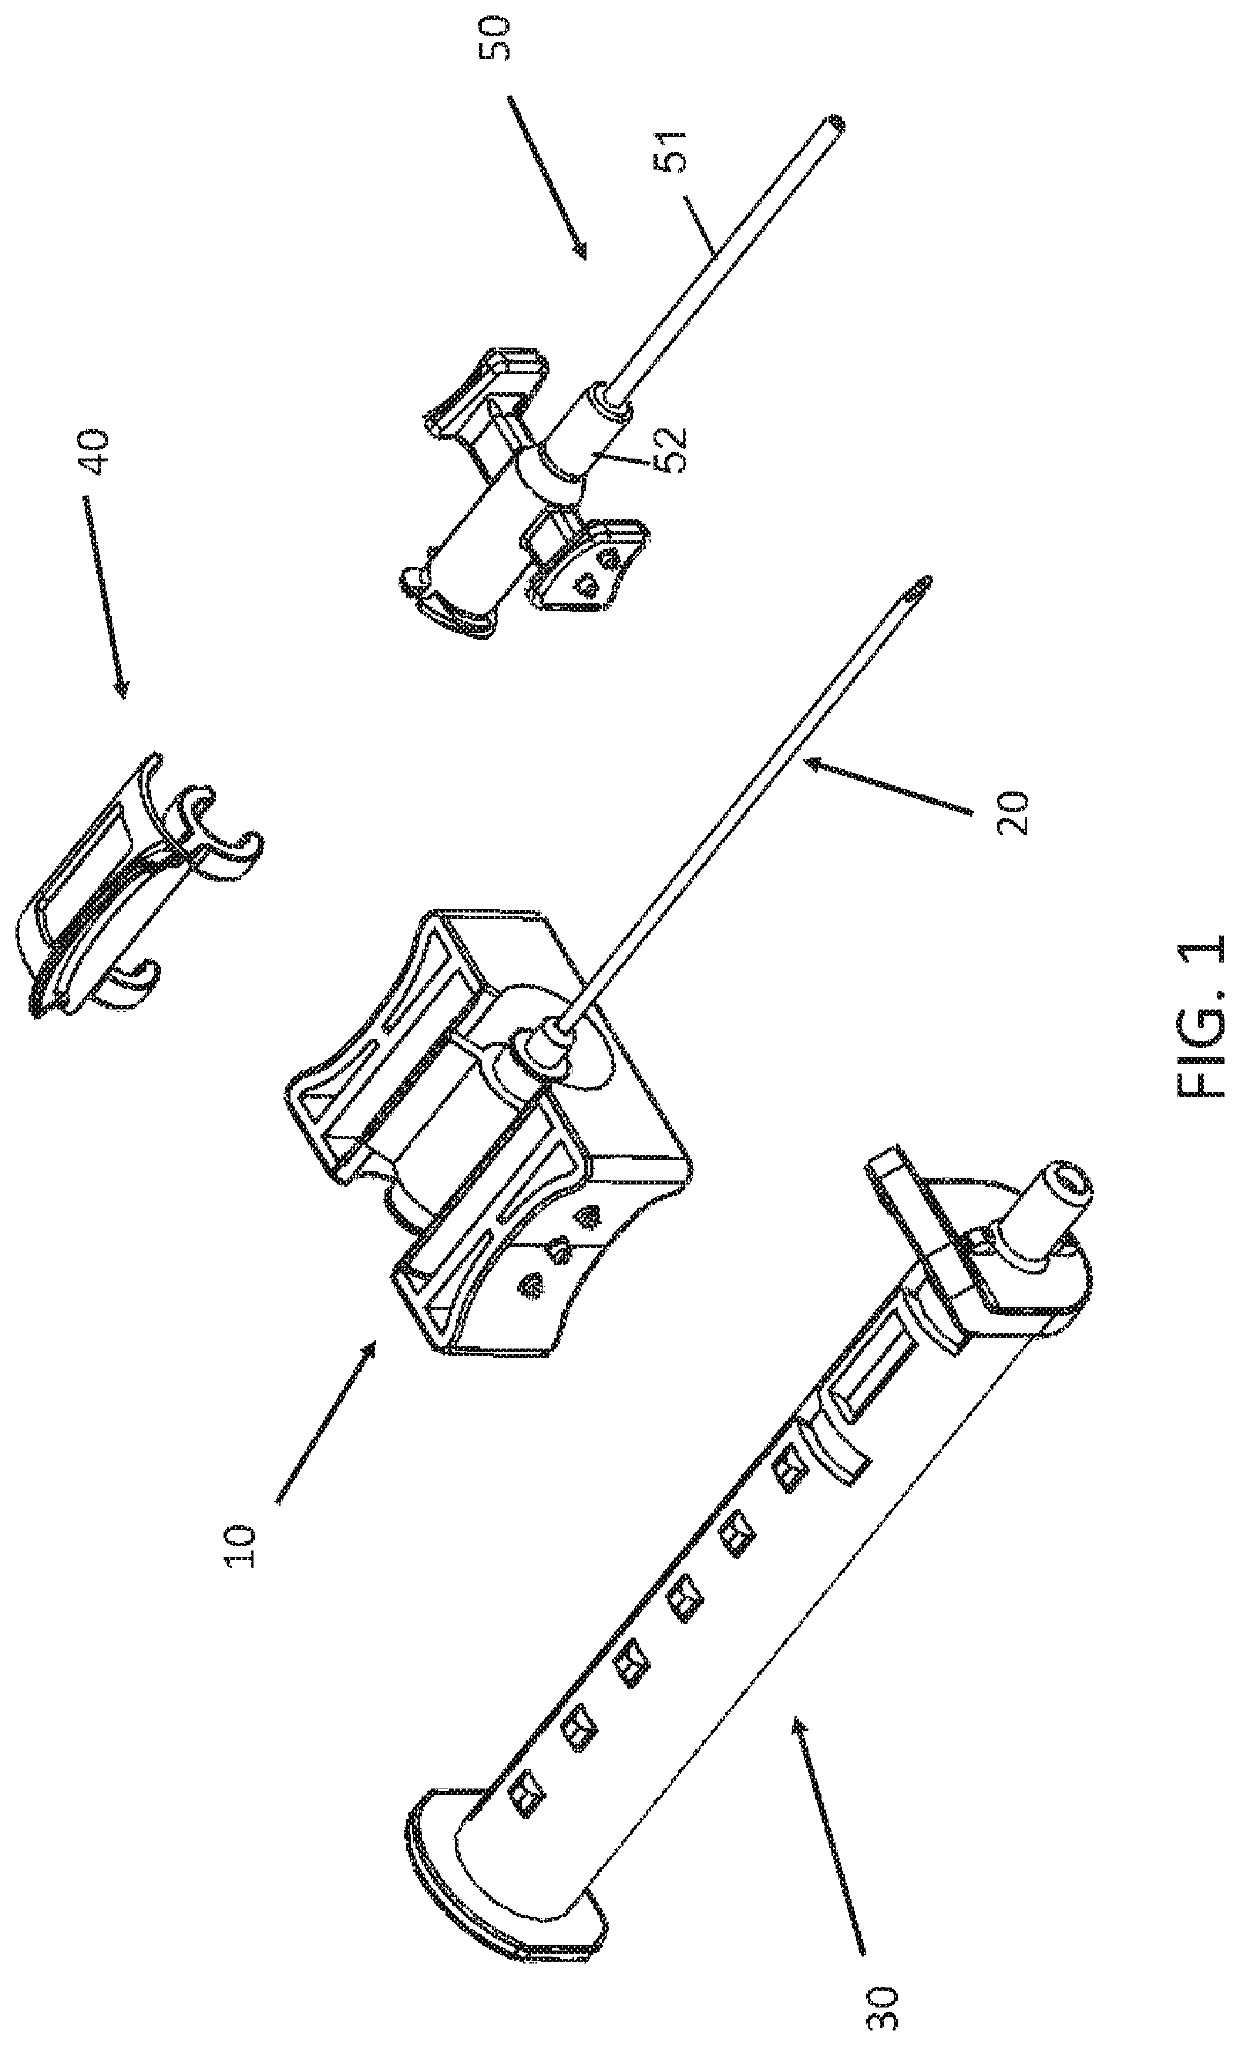 Intravenous access assist device with safety feature